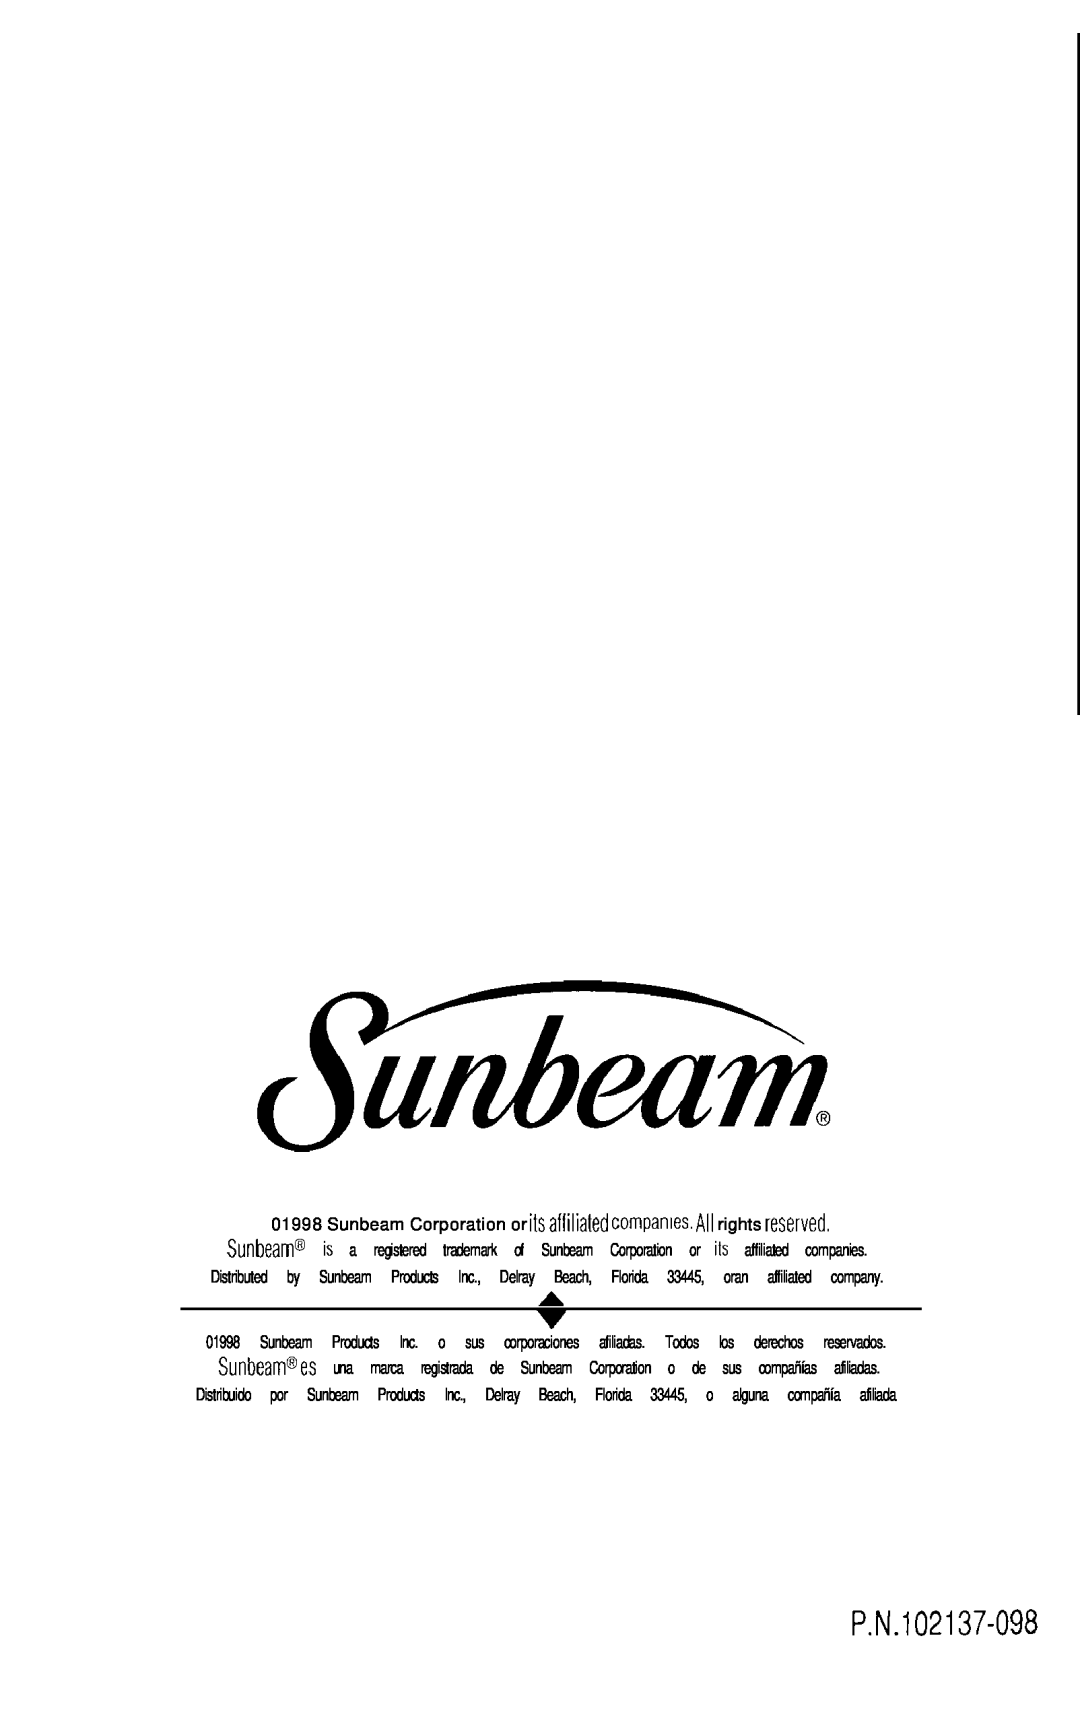 Sunbeam 3856-1 instruction manual P.N.102137-098, All rights reserved, is a 